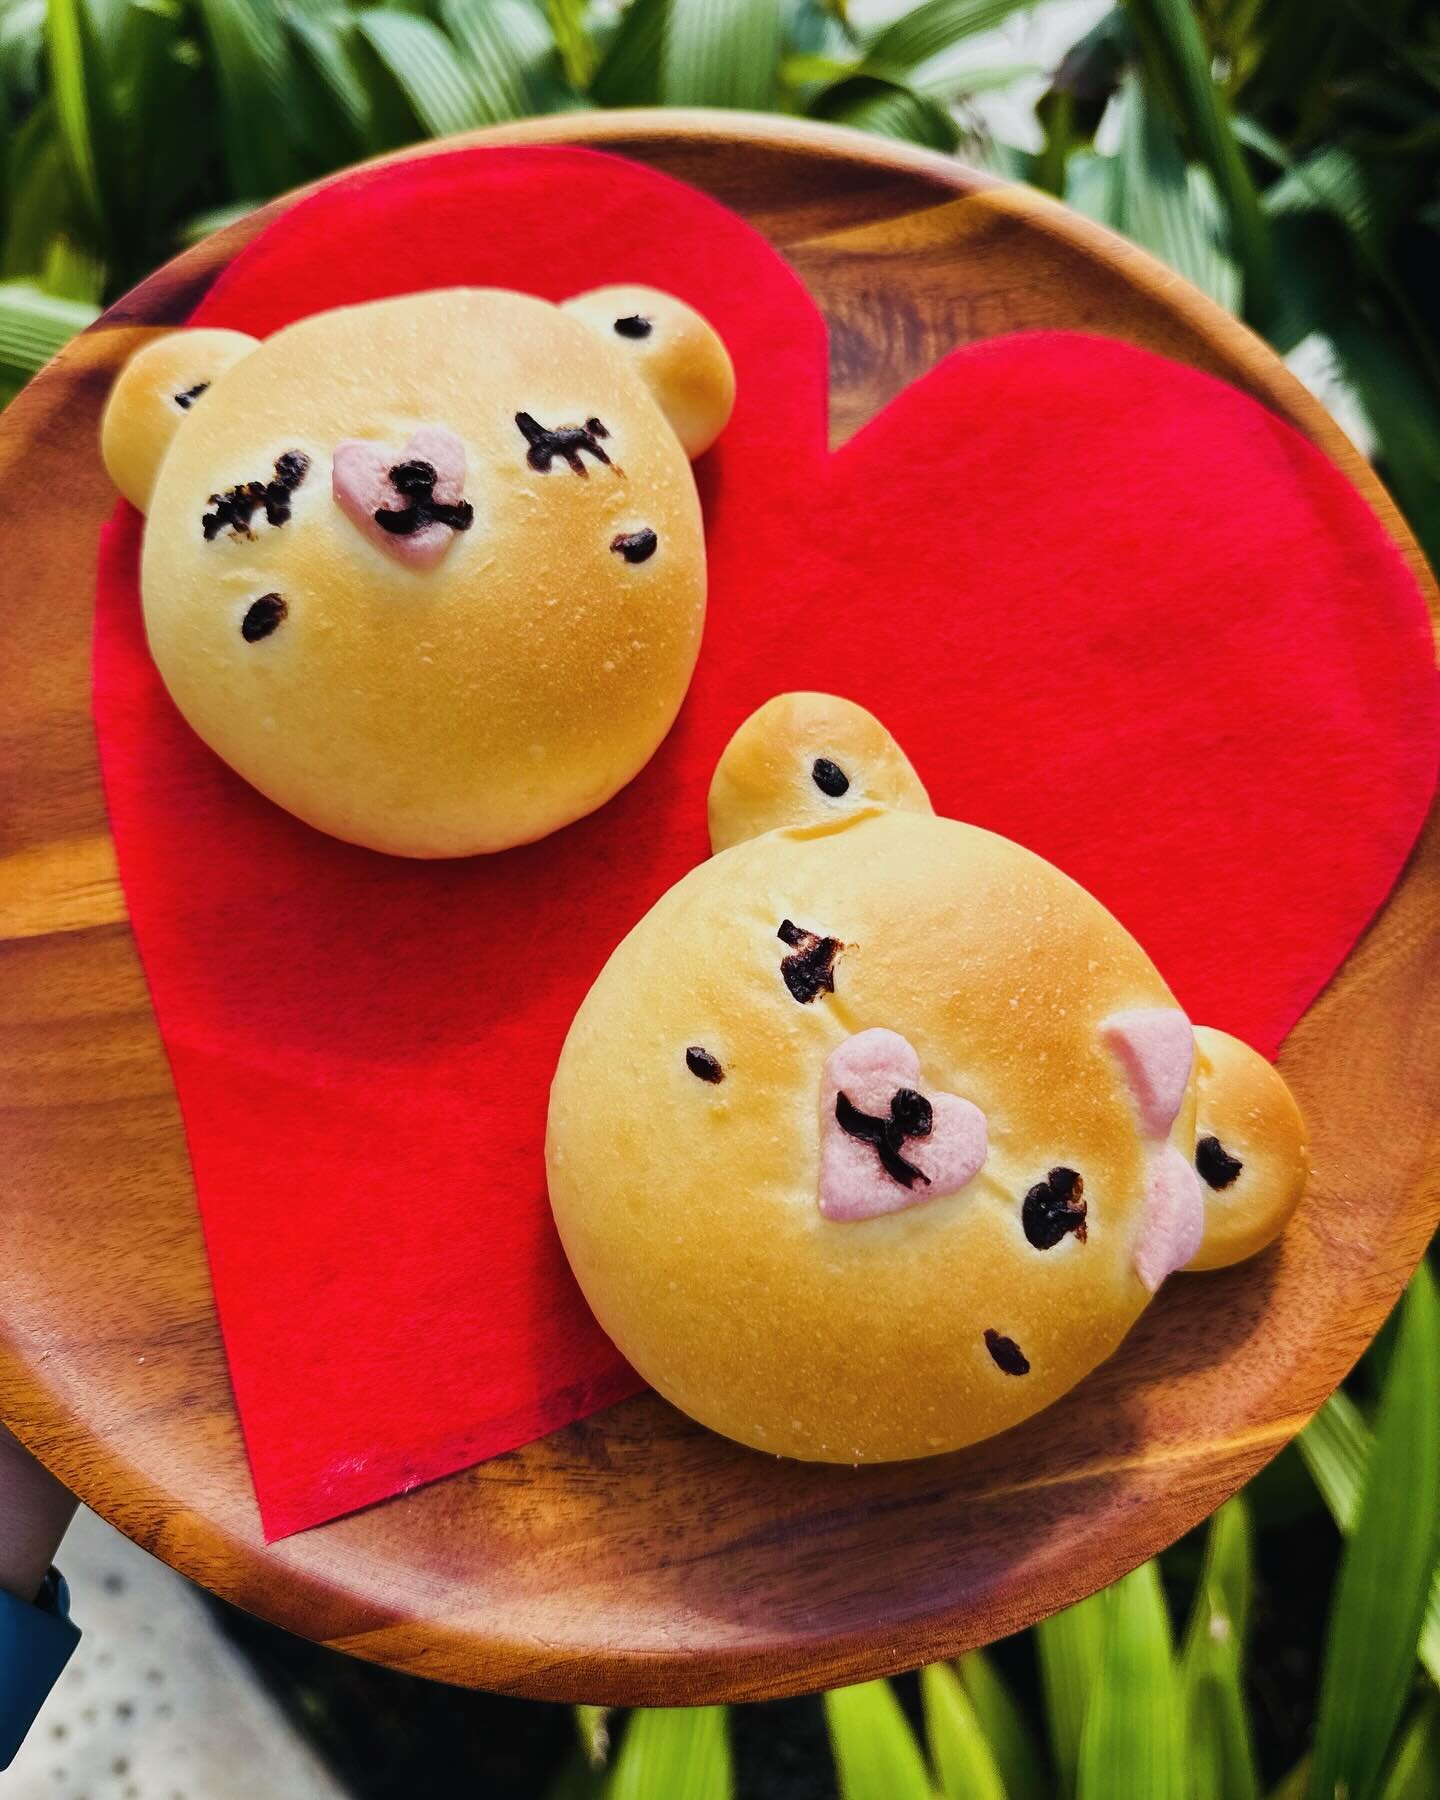 ✨❤️ Happy Valentine Day ❤️✨
Send love with our cute pastry&rsquo;s for your special 🥰 

🐻Valentine Kobo Kuma🧸: custard filling with soft bread 
🍓Fruit Danish🫐 : Almond and Danish cram with berries

💝Starting on 2/13 ~ 

#okayamakobousa #okayama